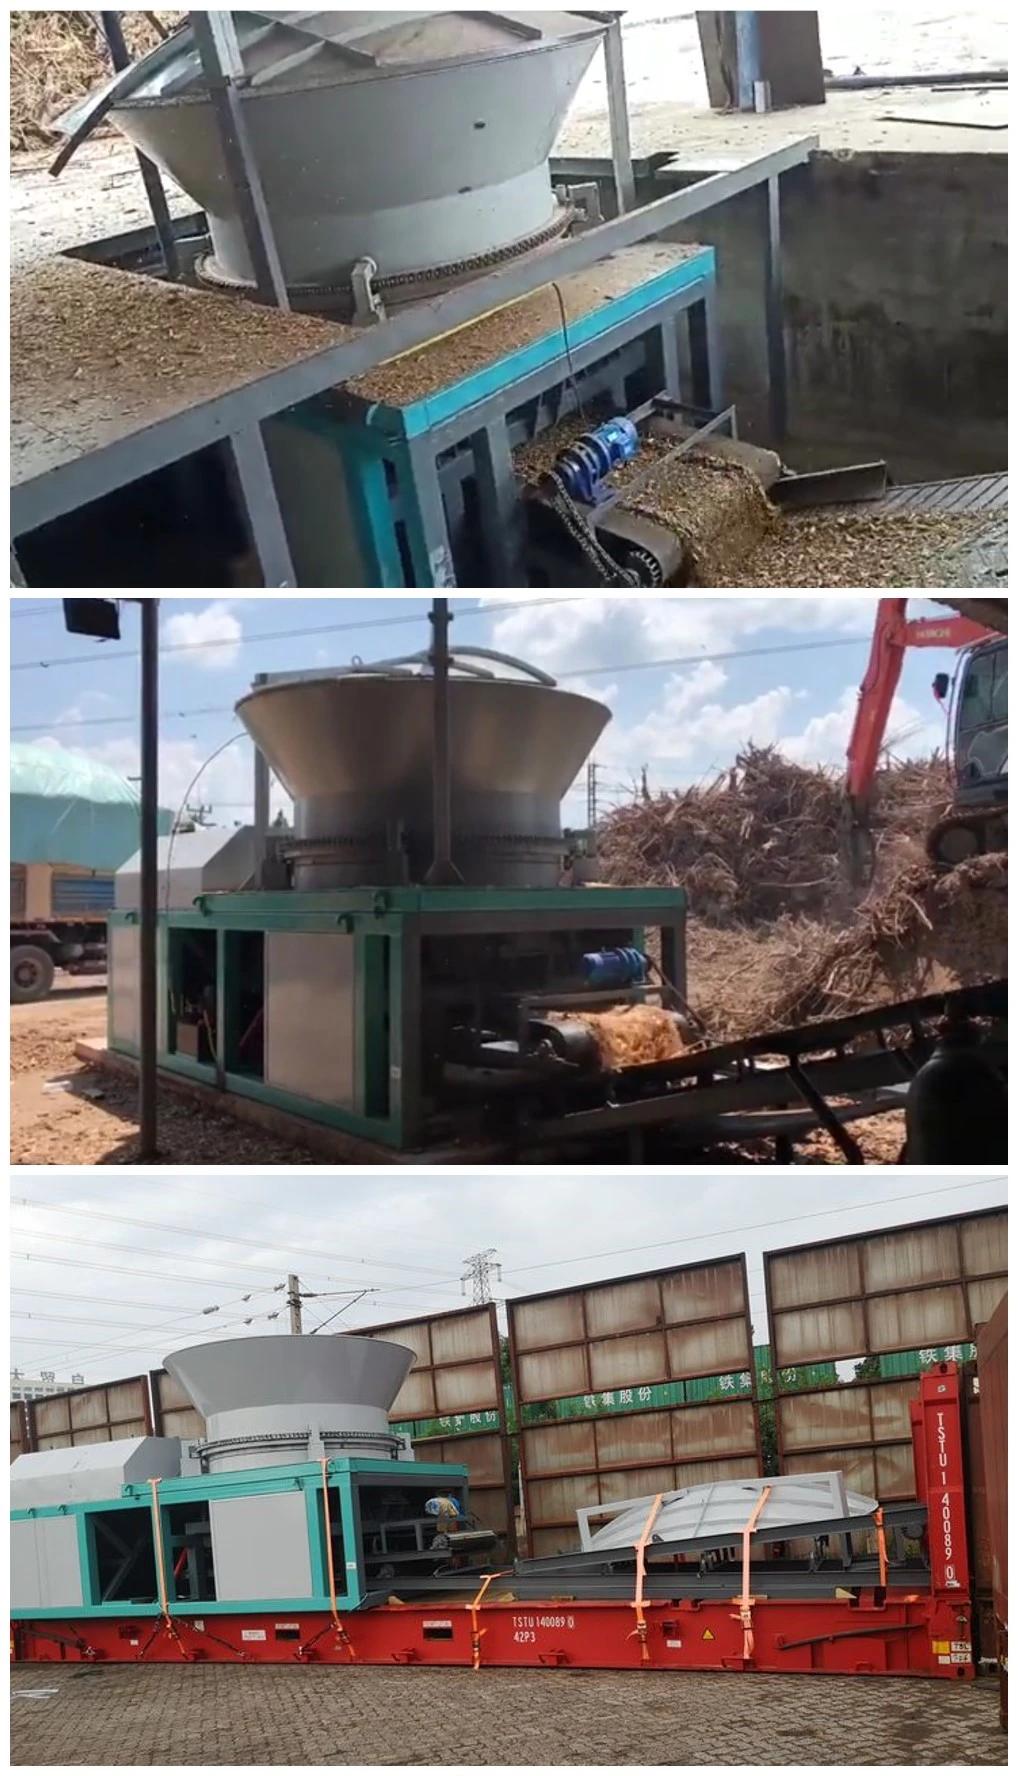 Repurchase Rate Is Very High Wood Crusher with High Capacity